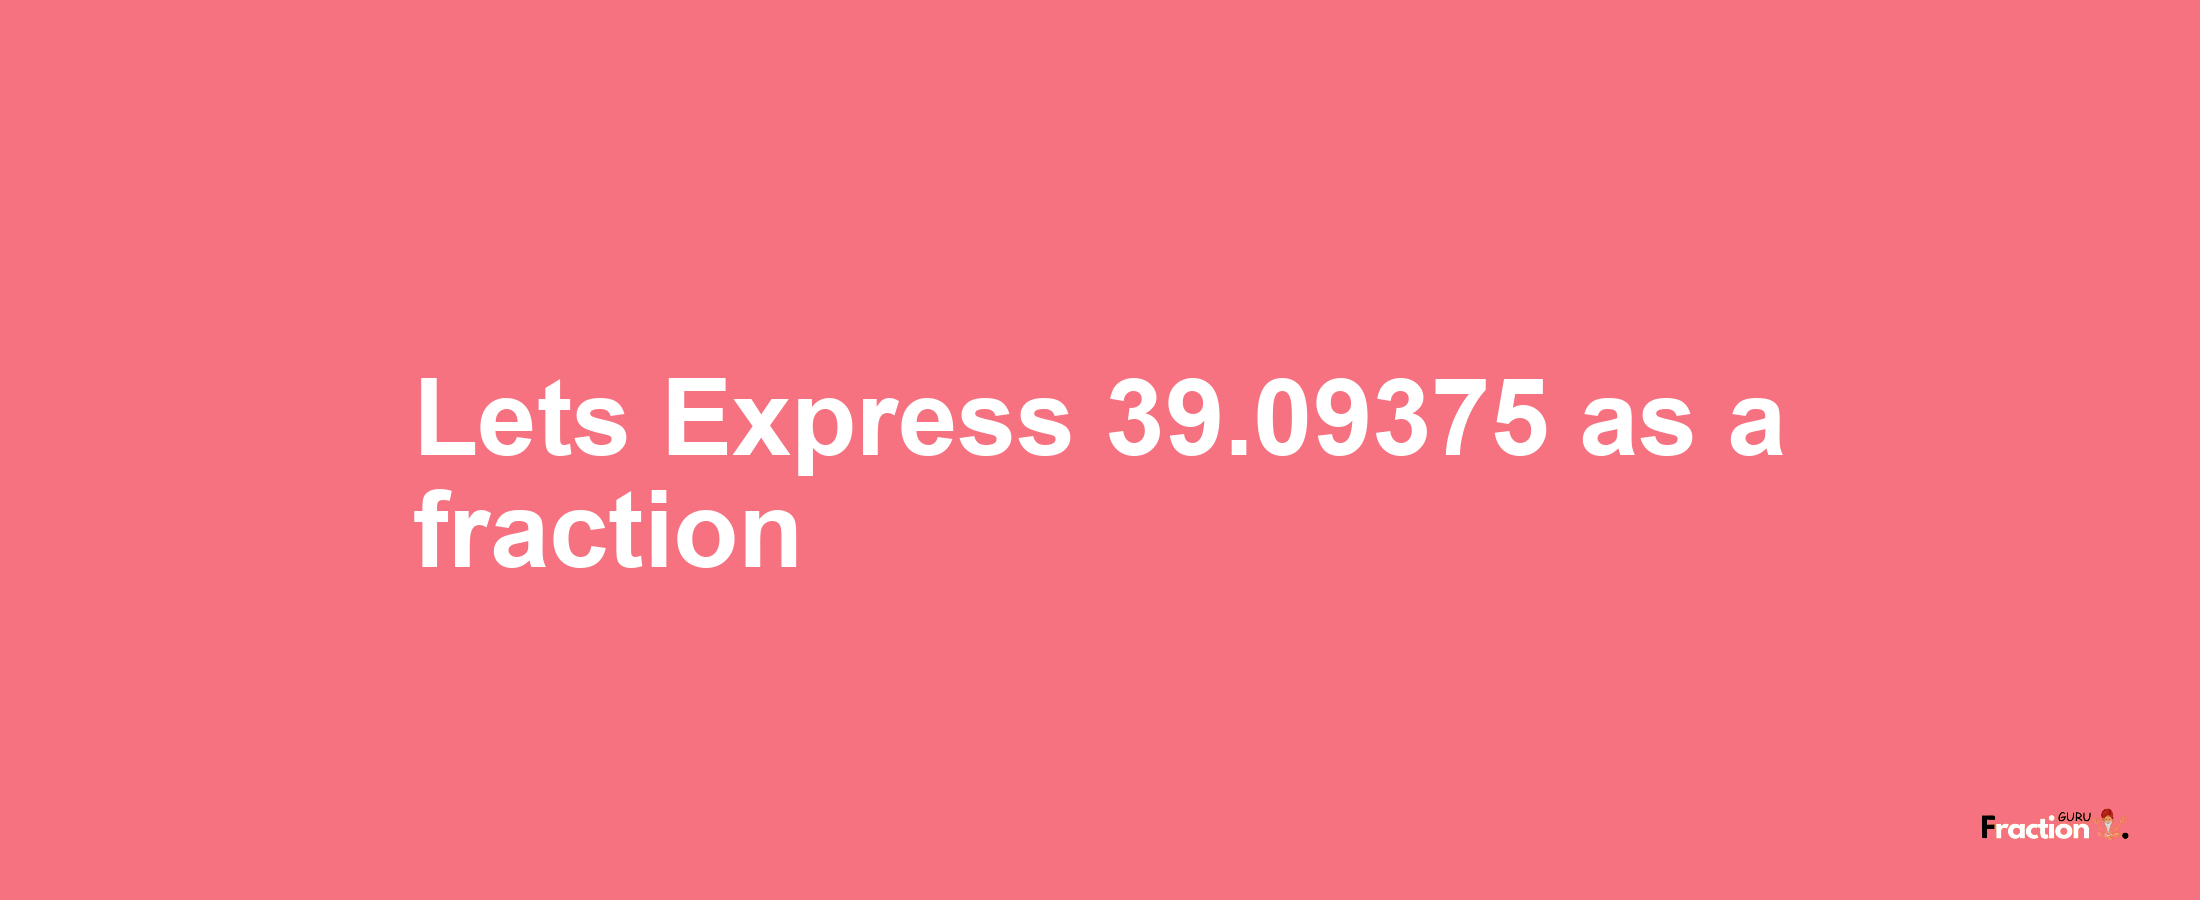 Lets Express 39.09375 as afraction